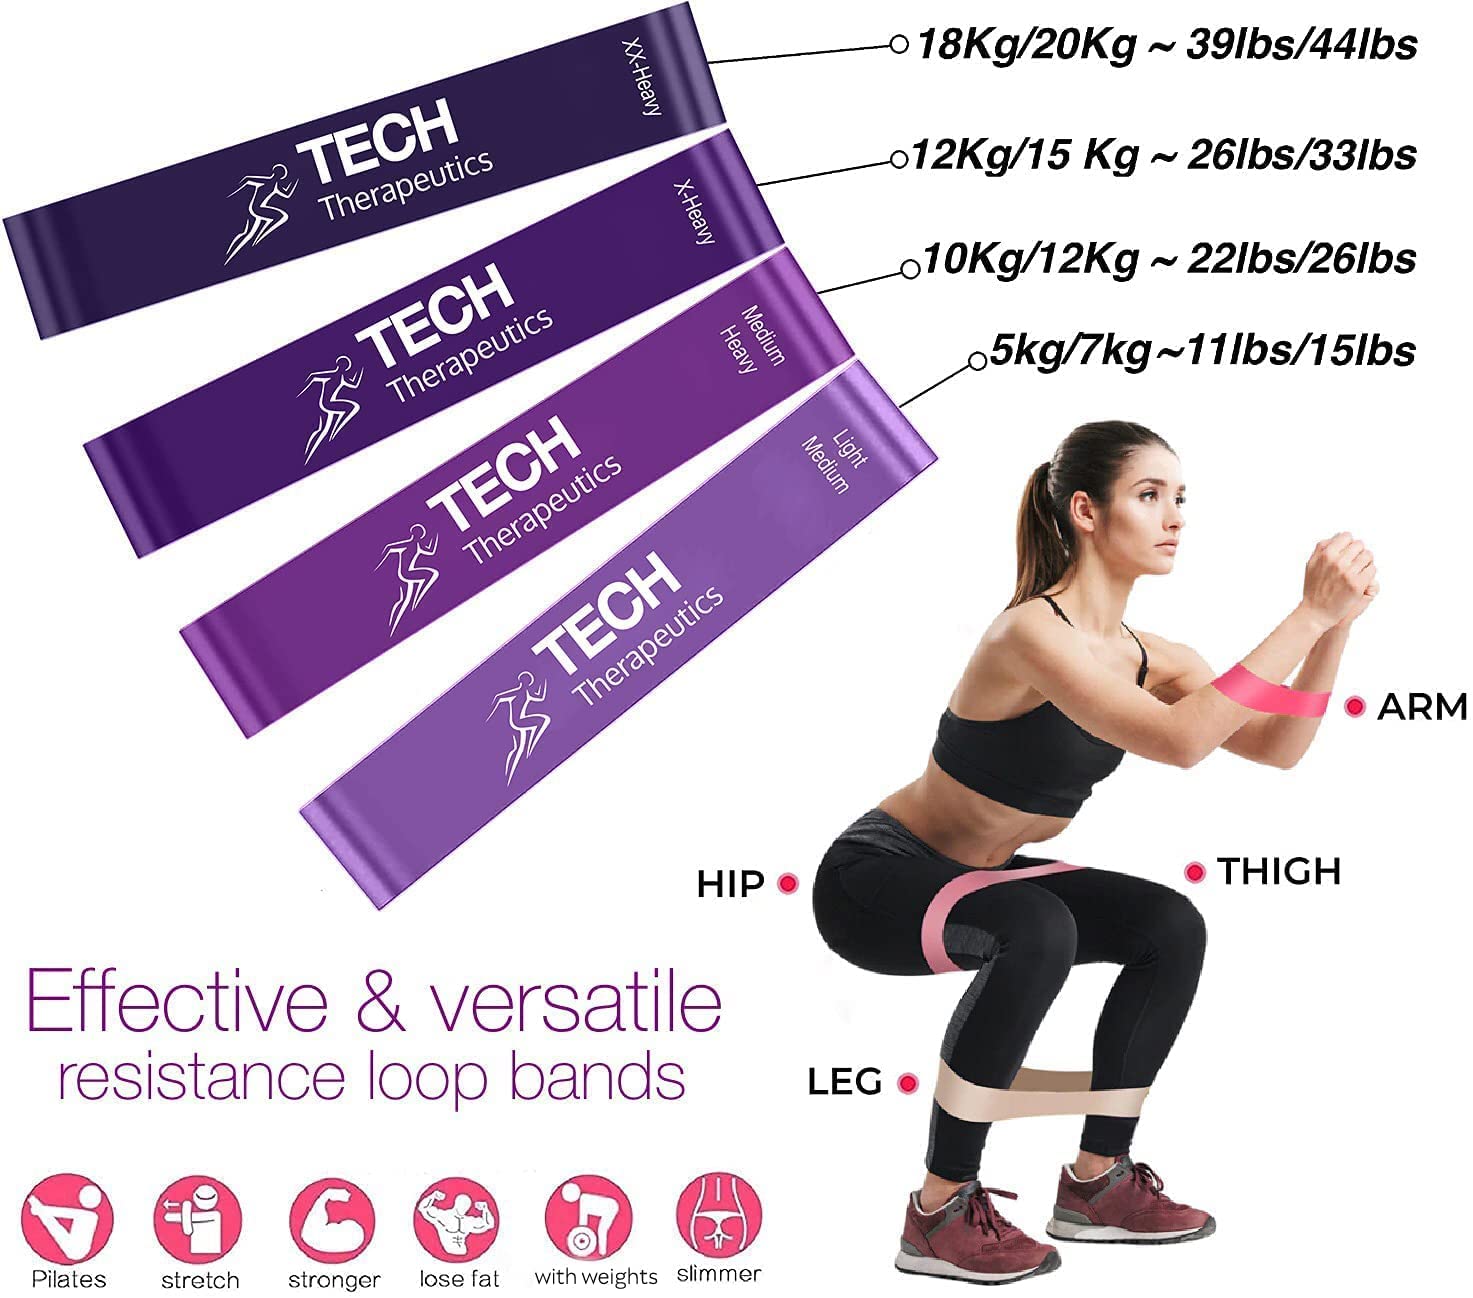 Elastic Fitness Bands Kit. Resistance Bands. Complete Home Gym Kit with 4 Loop Bands, 2 Cloth Resistance Bands Tech Therapeutics